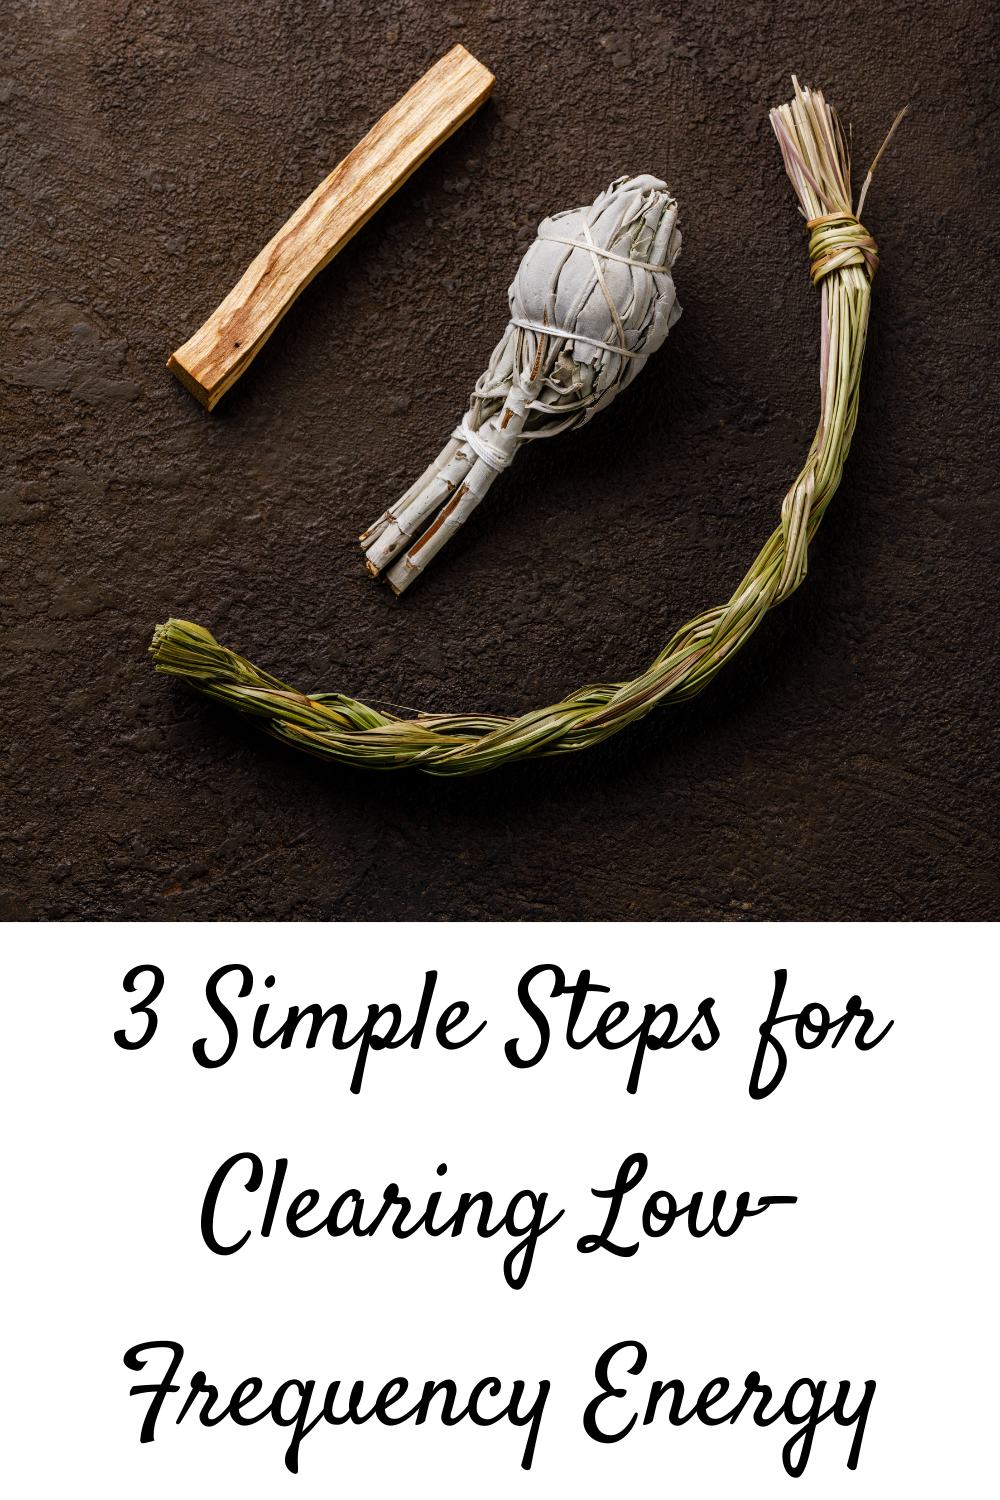 3 Simple Steps for Clearing Low-Frequency Energy